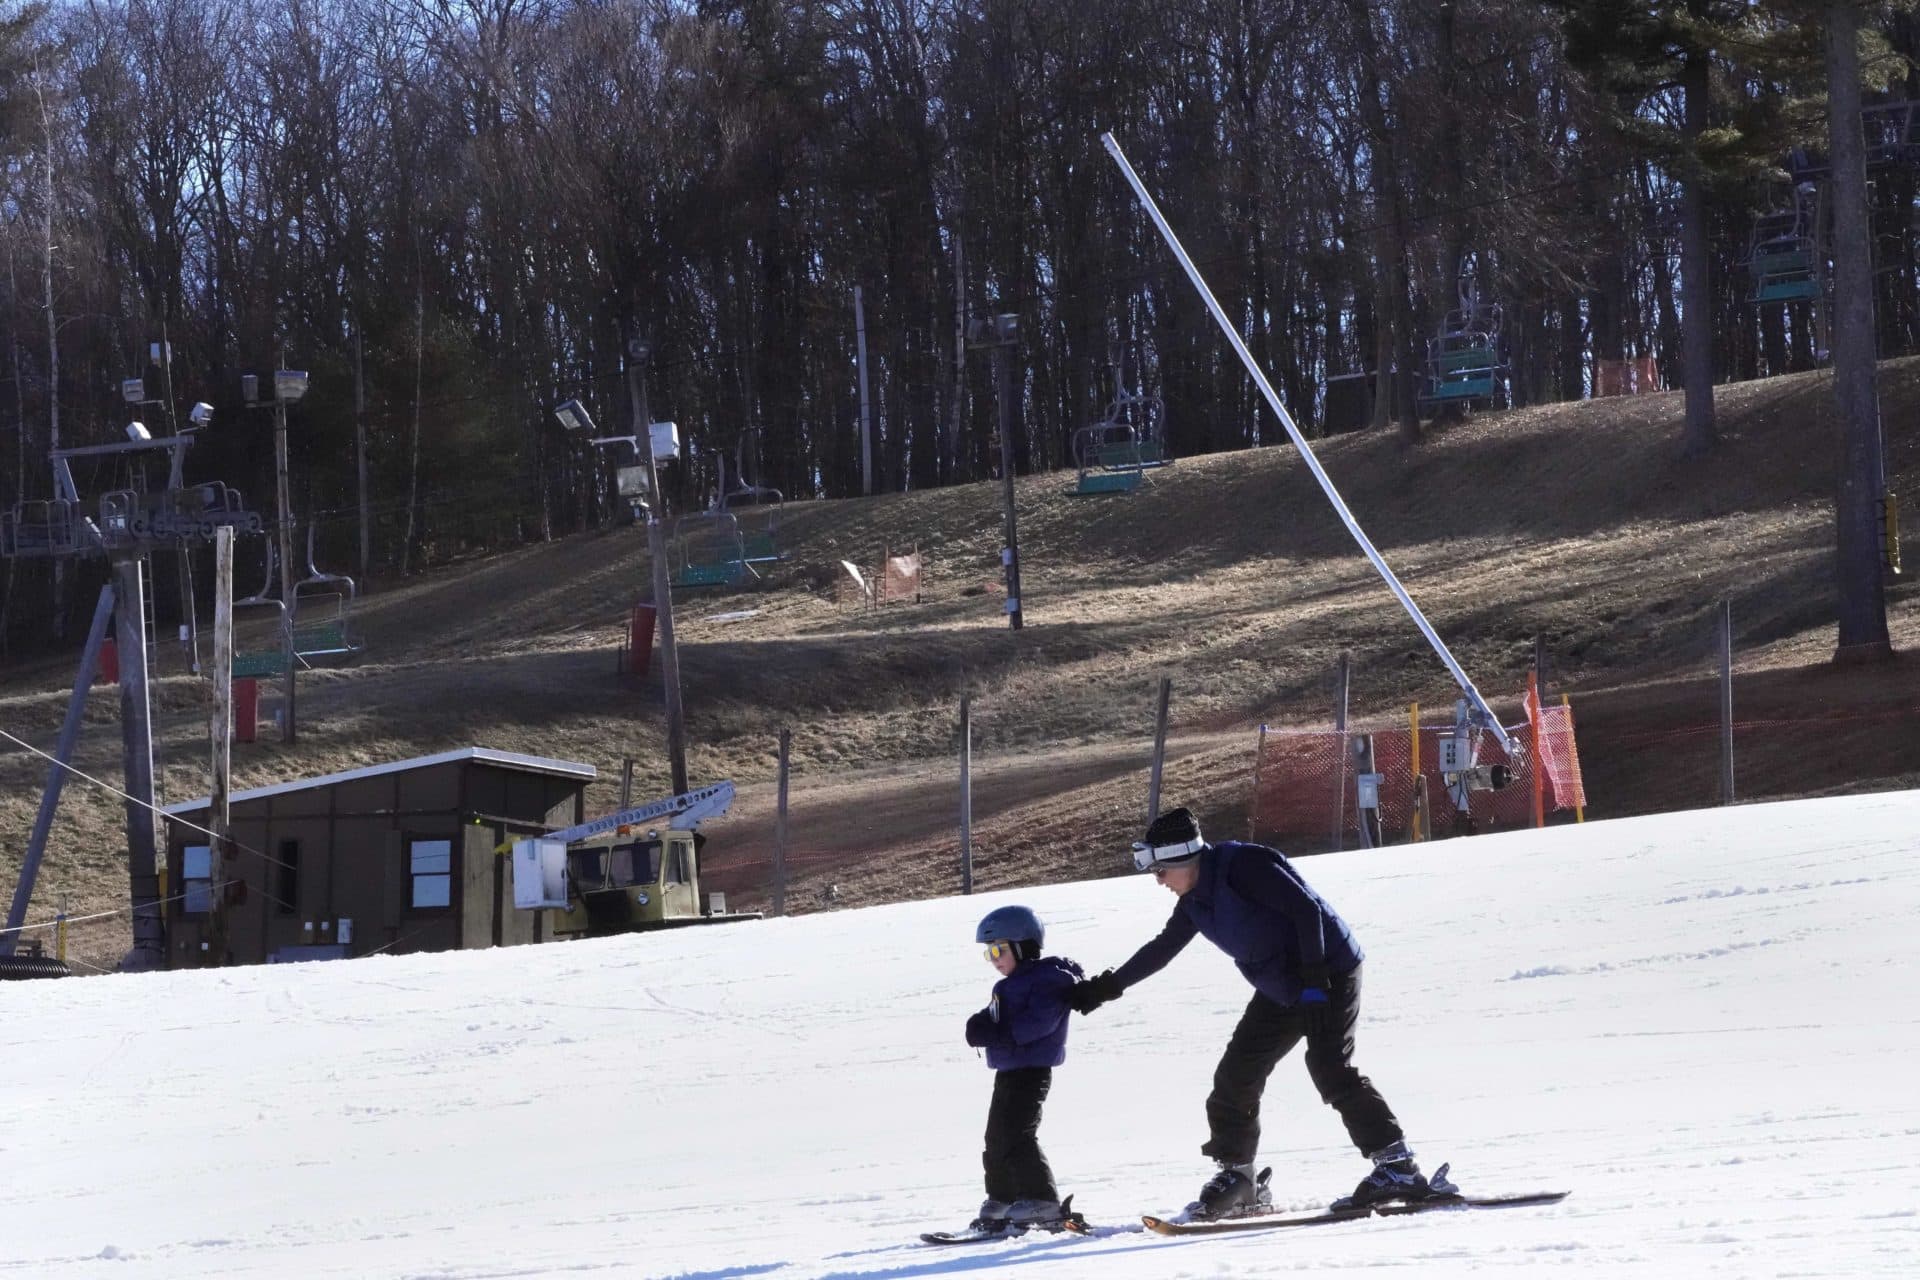 A child learns to ski on the beginners slope, adjacent to snowless snowboarding park, at rear, at the Ski Bradford ski area, Tuesday, Feb. 14, 2023, in in Bradford, Mass. For much of the Eastern United States, the winter of 2023 has been a bust. Snow totals are far below average from Boston to Philadelphia in 2023 and warmer temperatures have often resulted in more spring-like days than blizzard-like conditions. (AP Photo/Charles Krupa)